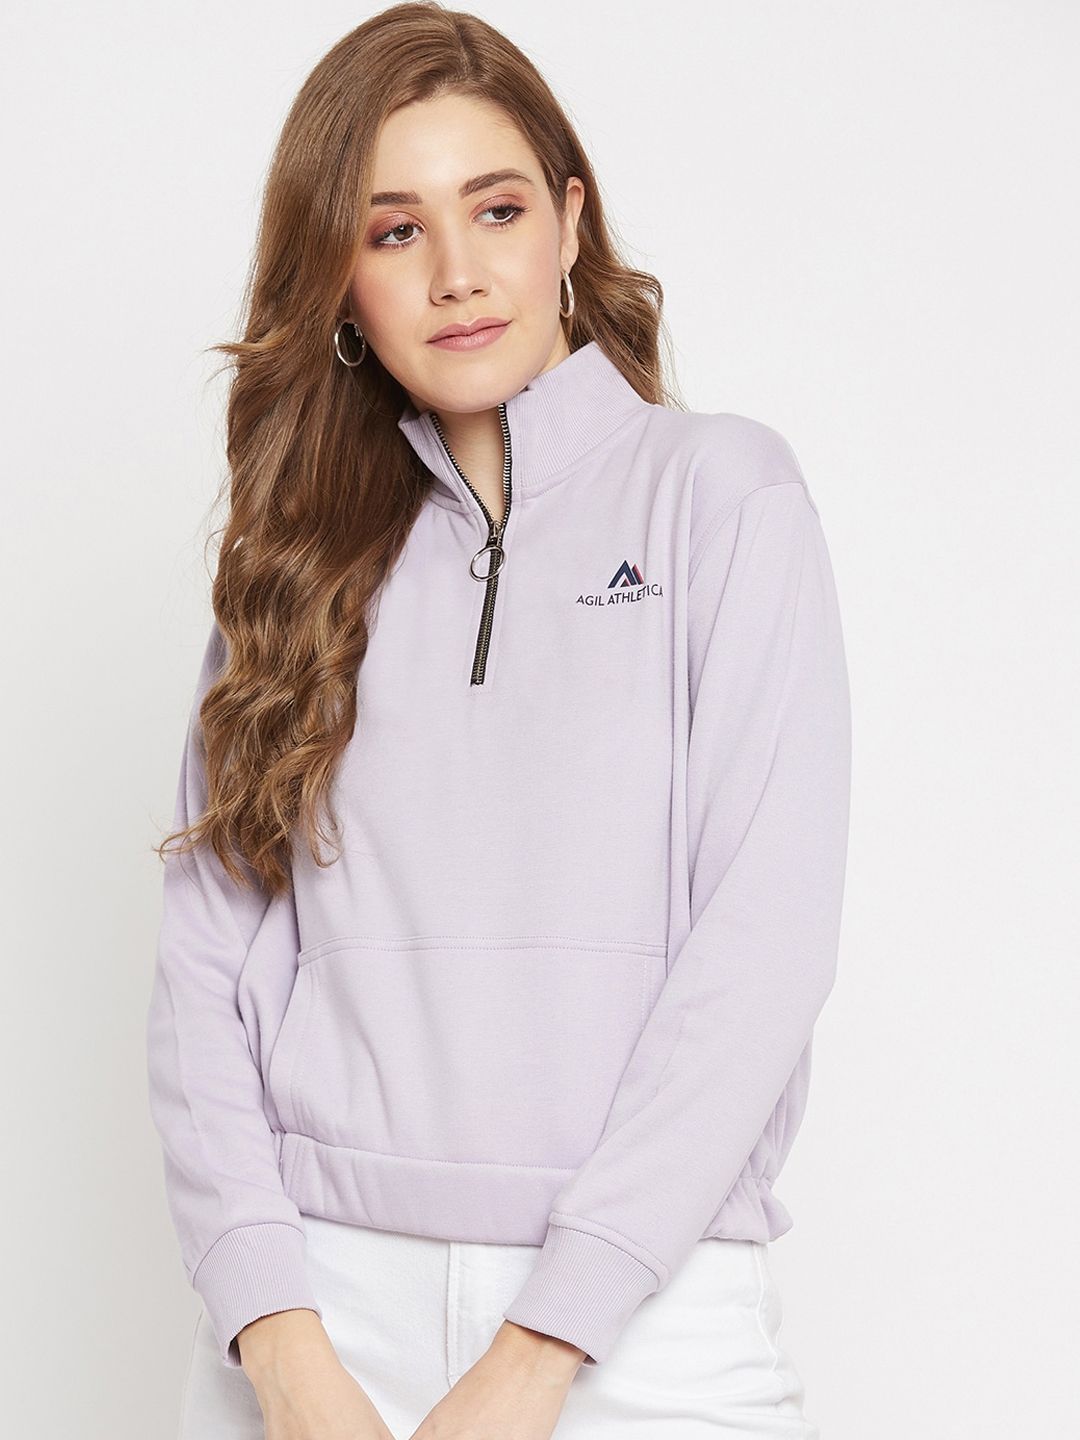 AGIL ATHLETICA Women Lavender Lightweight Sporty Jacket Price in India